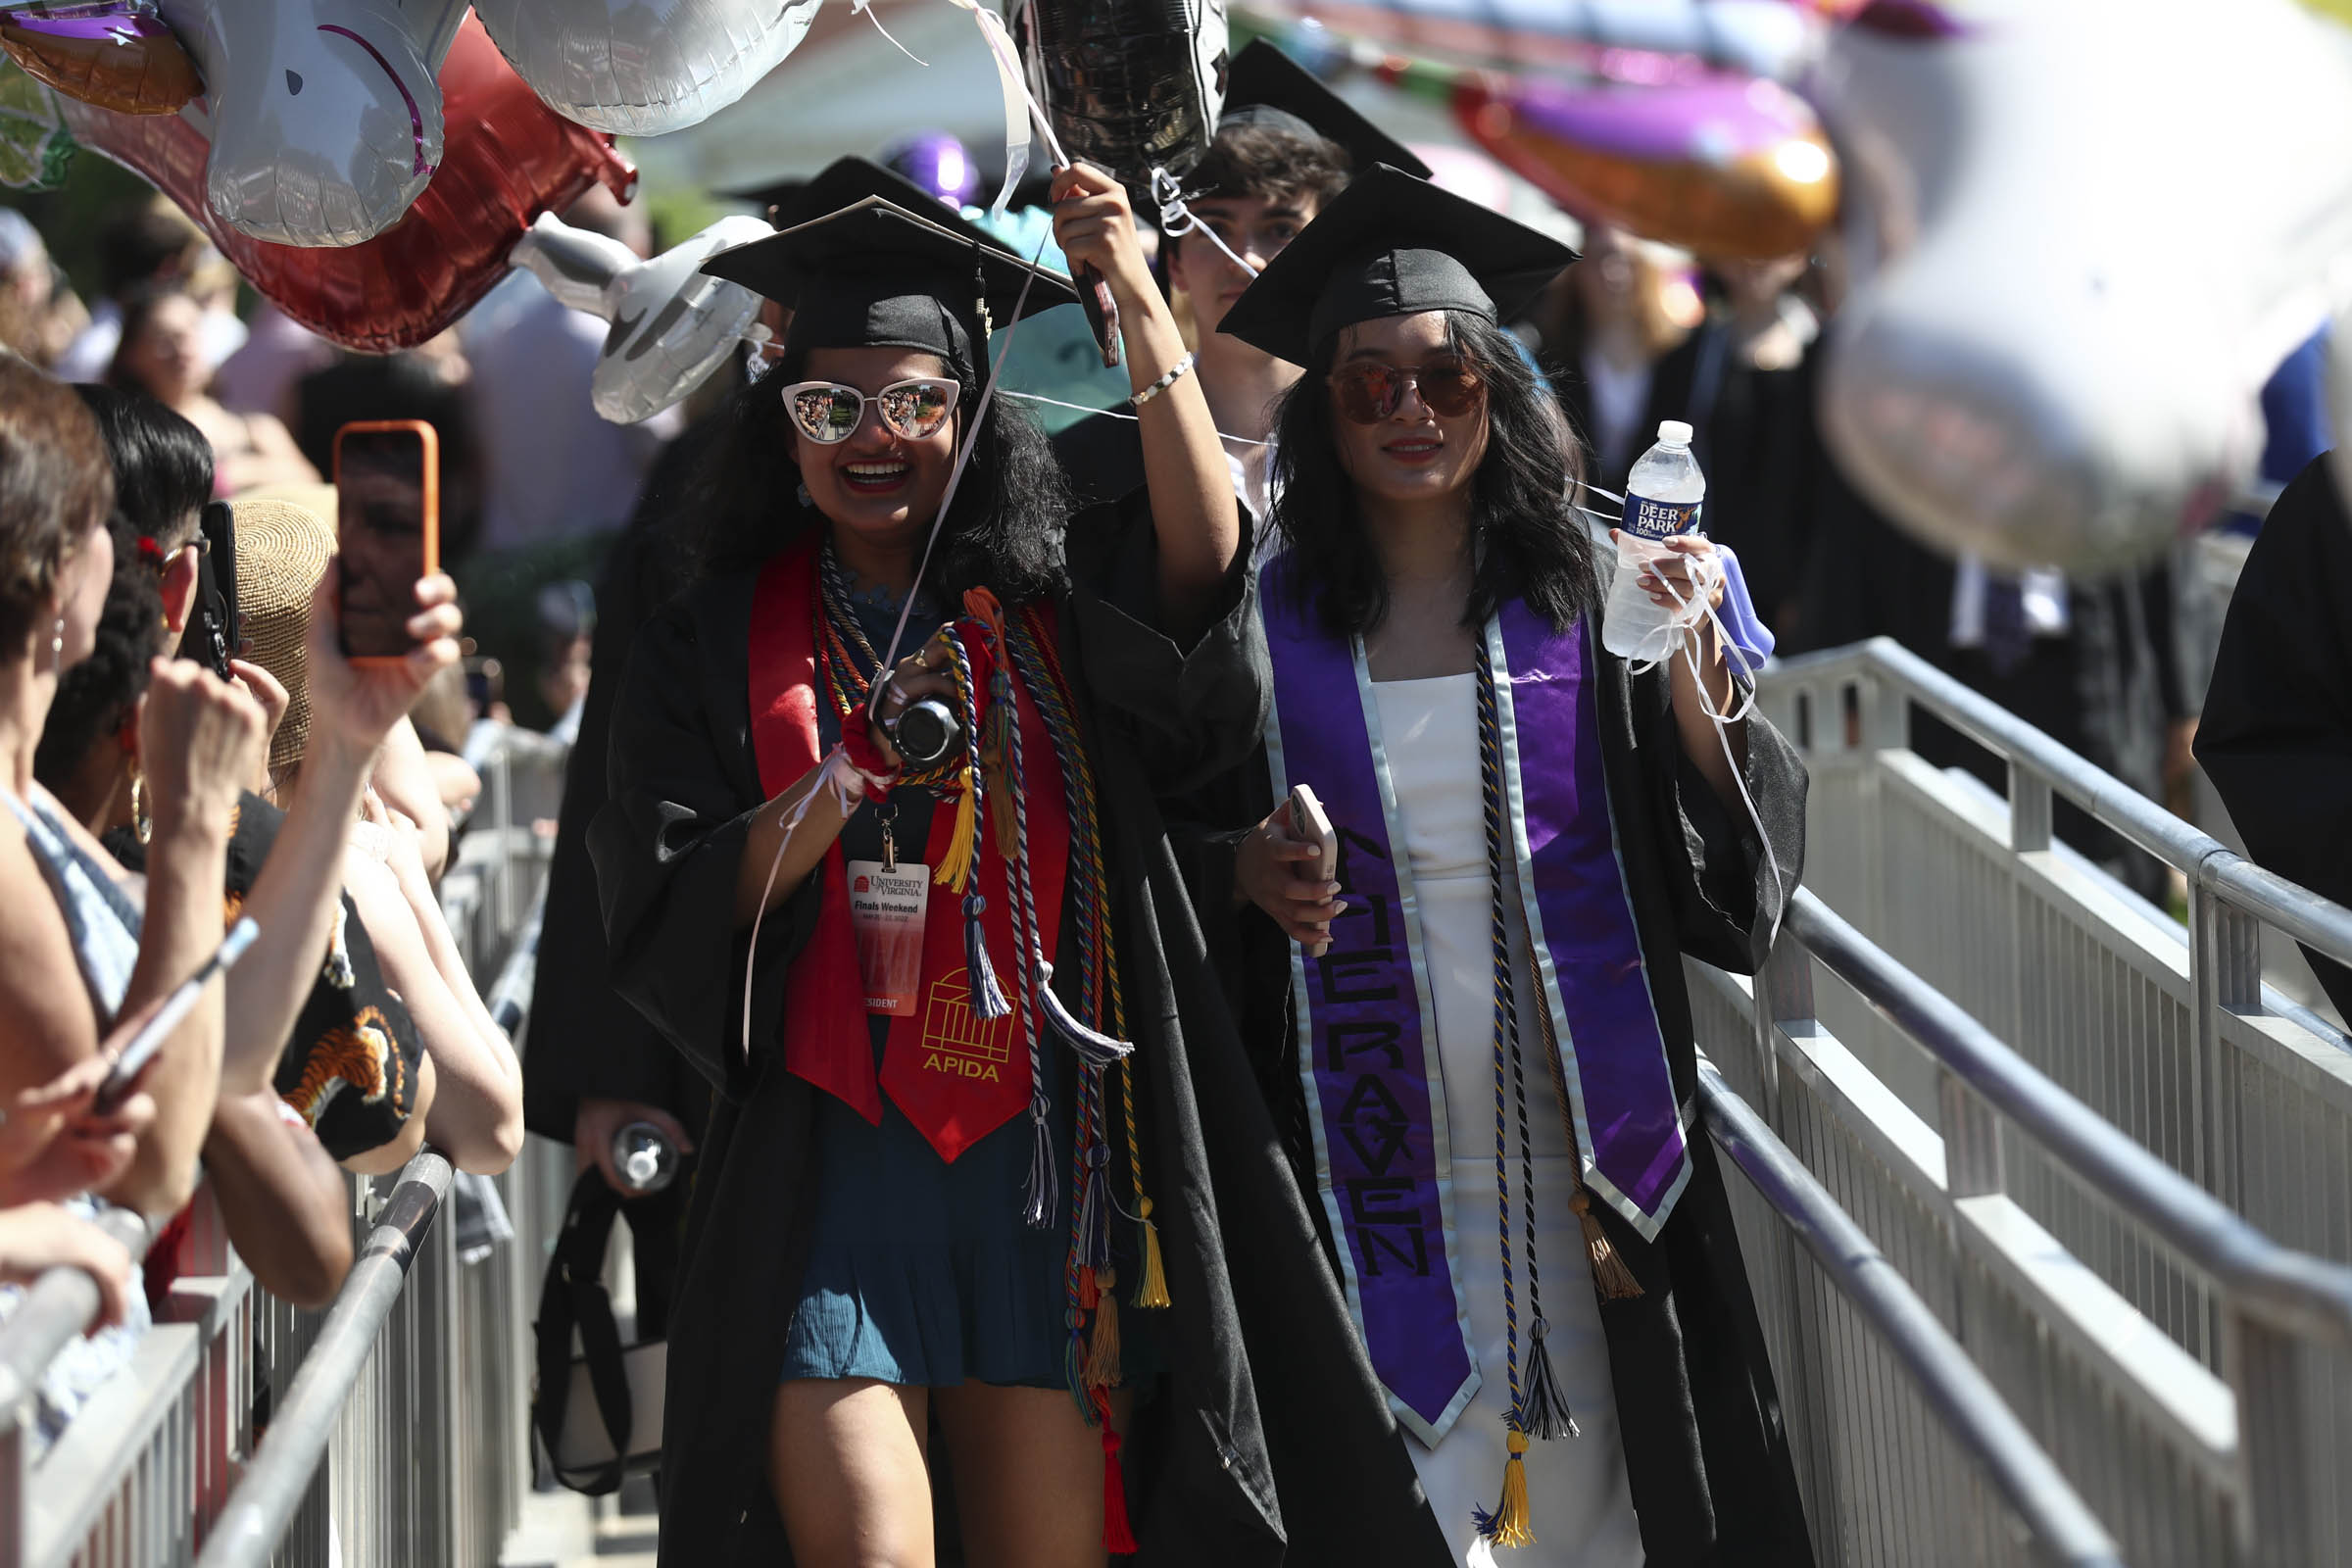 Two students carrying bottled water and balloons walk past a cheering crowd.